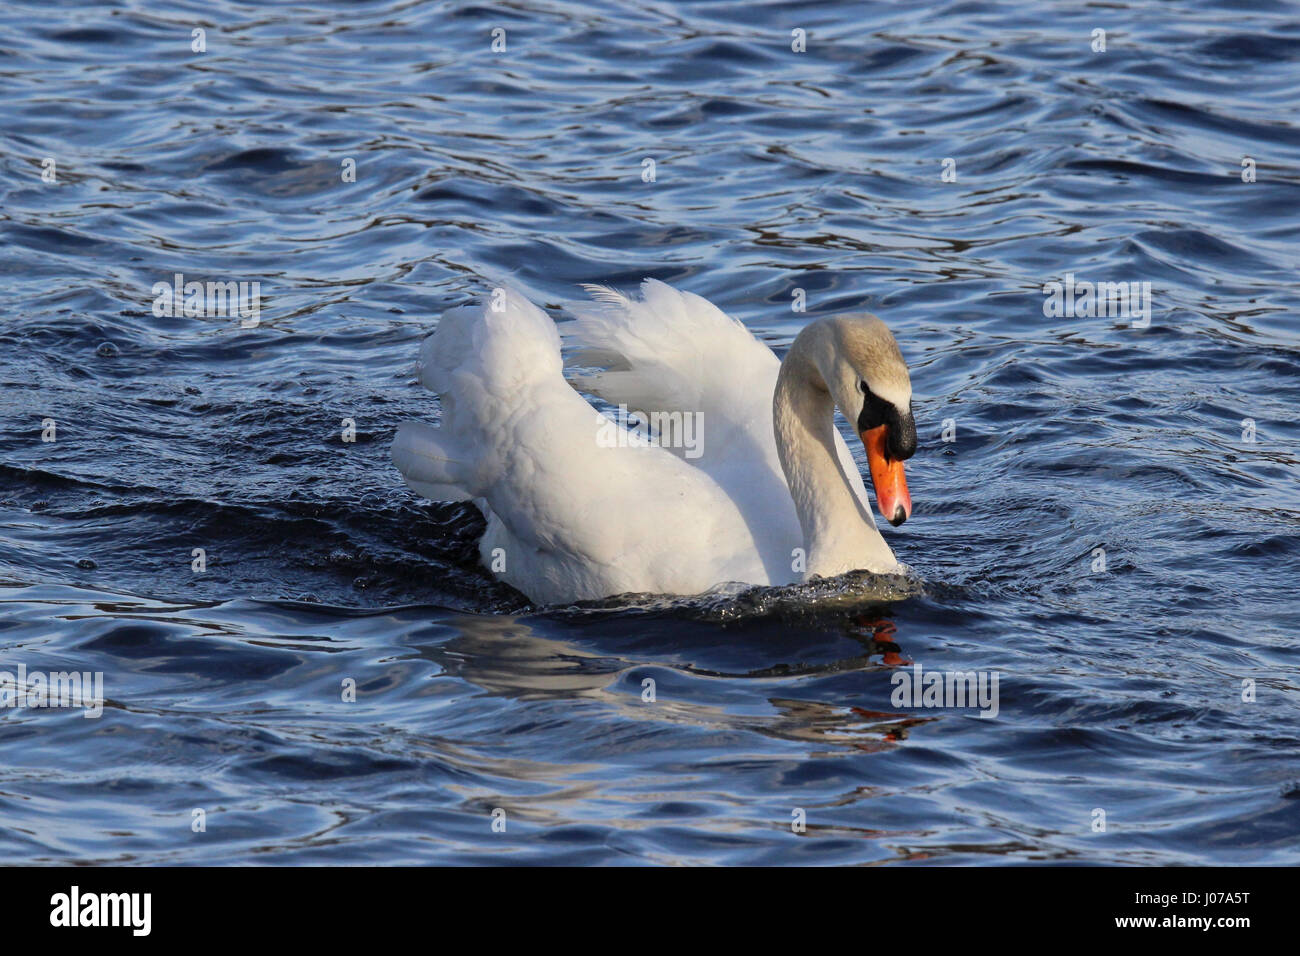 A swan defends its territory by swimming in an aggressive posture. Stock Photo